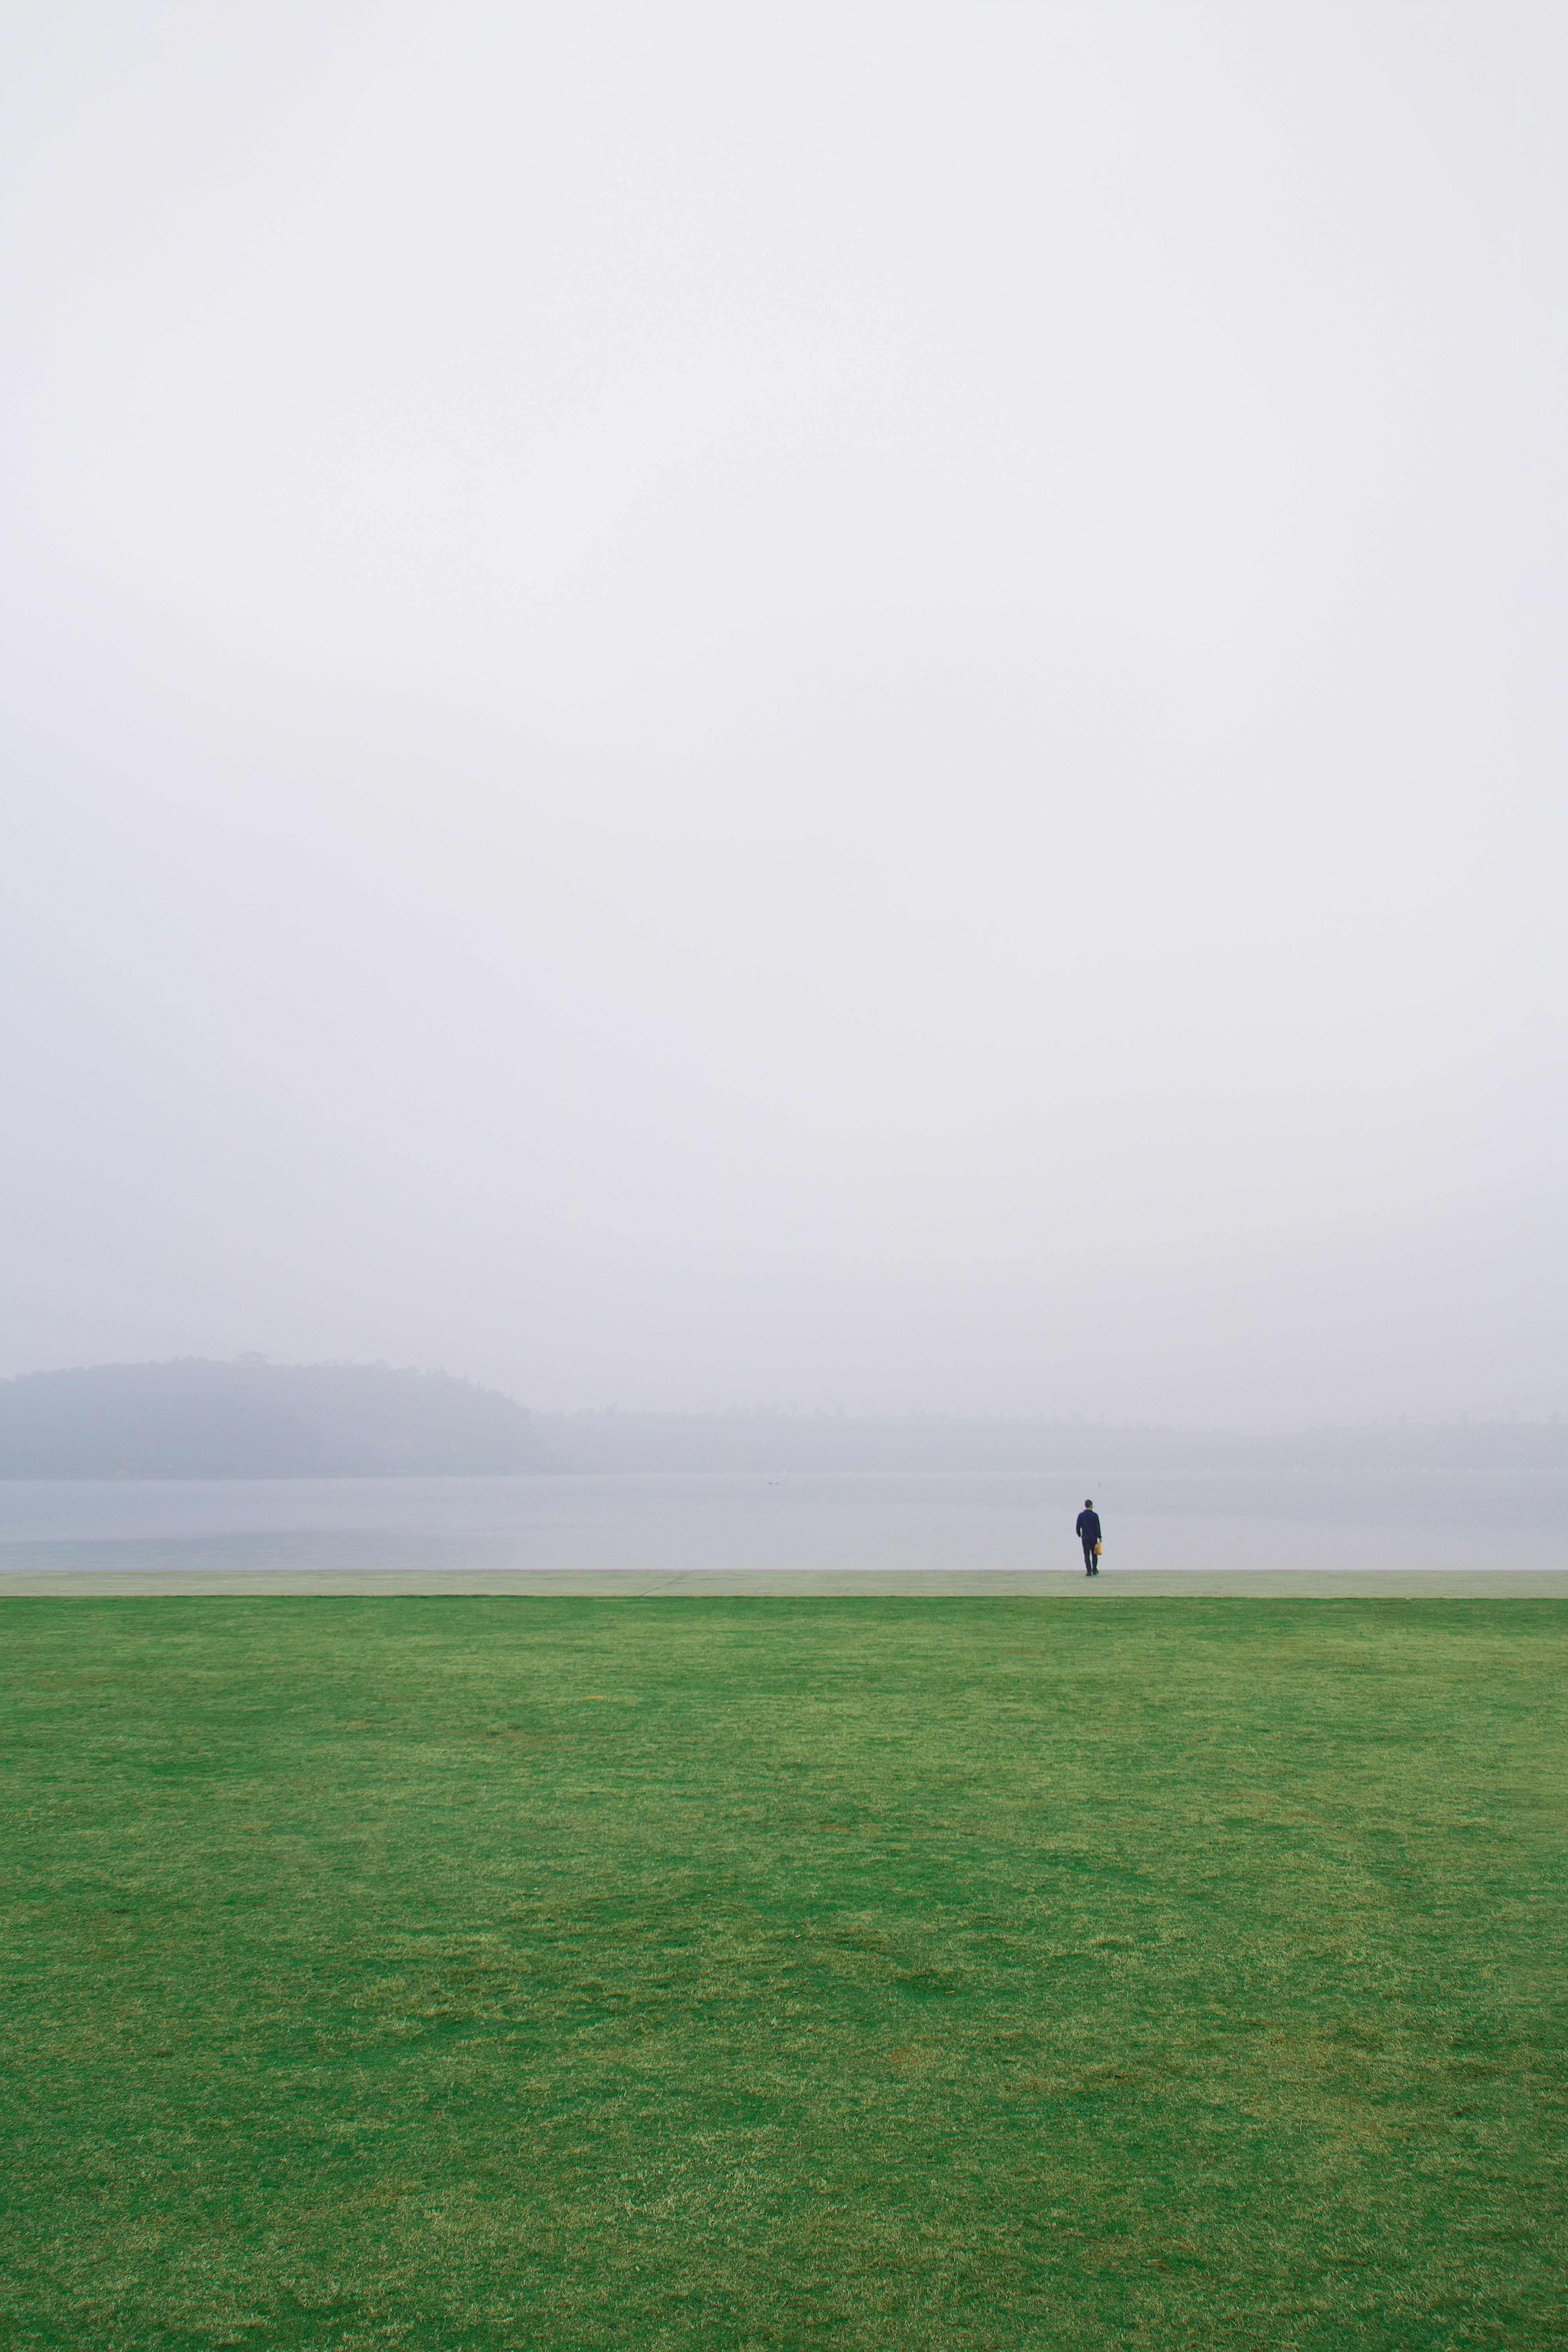 minimalism, privacy, loneliness, grass, horizon, seclusion, field images